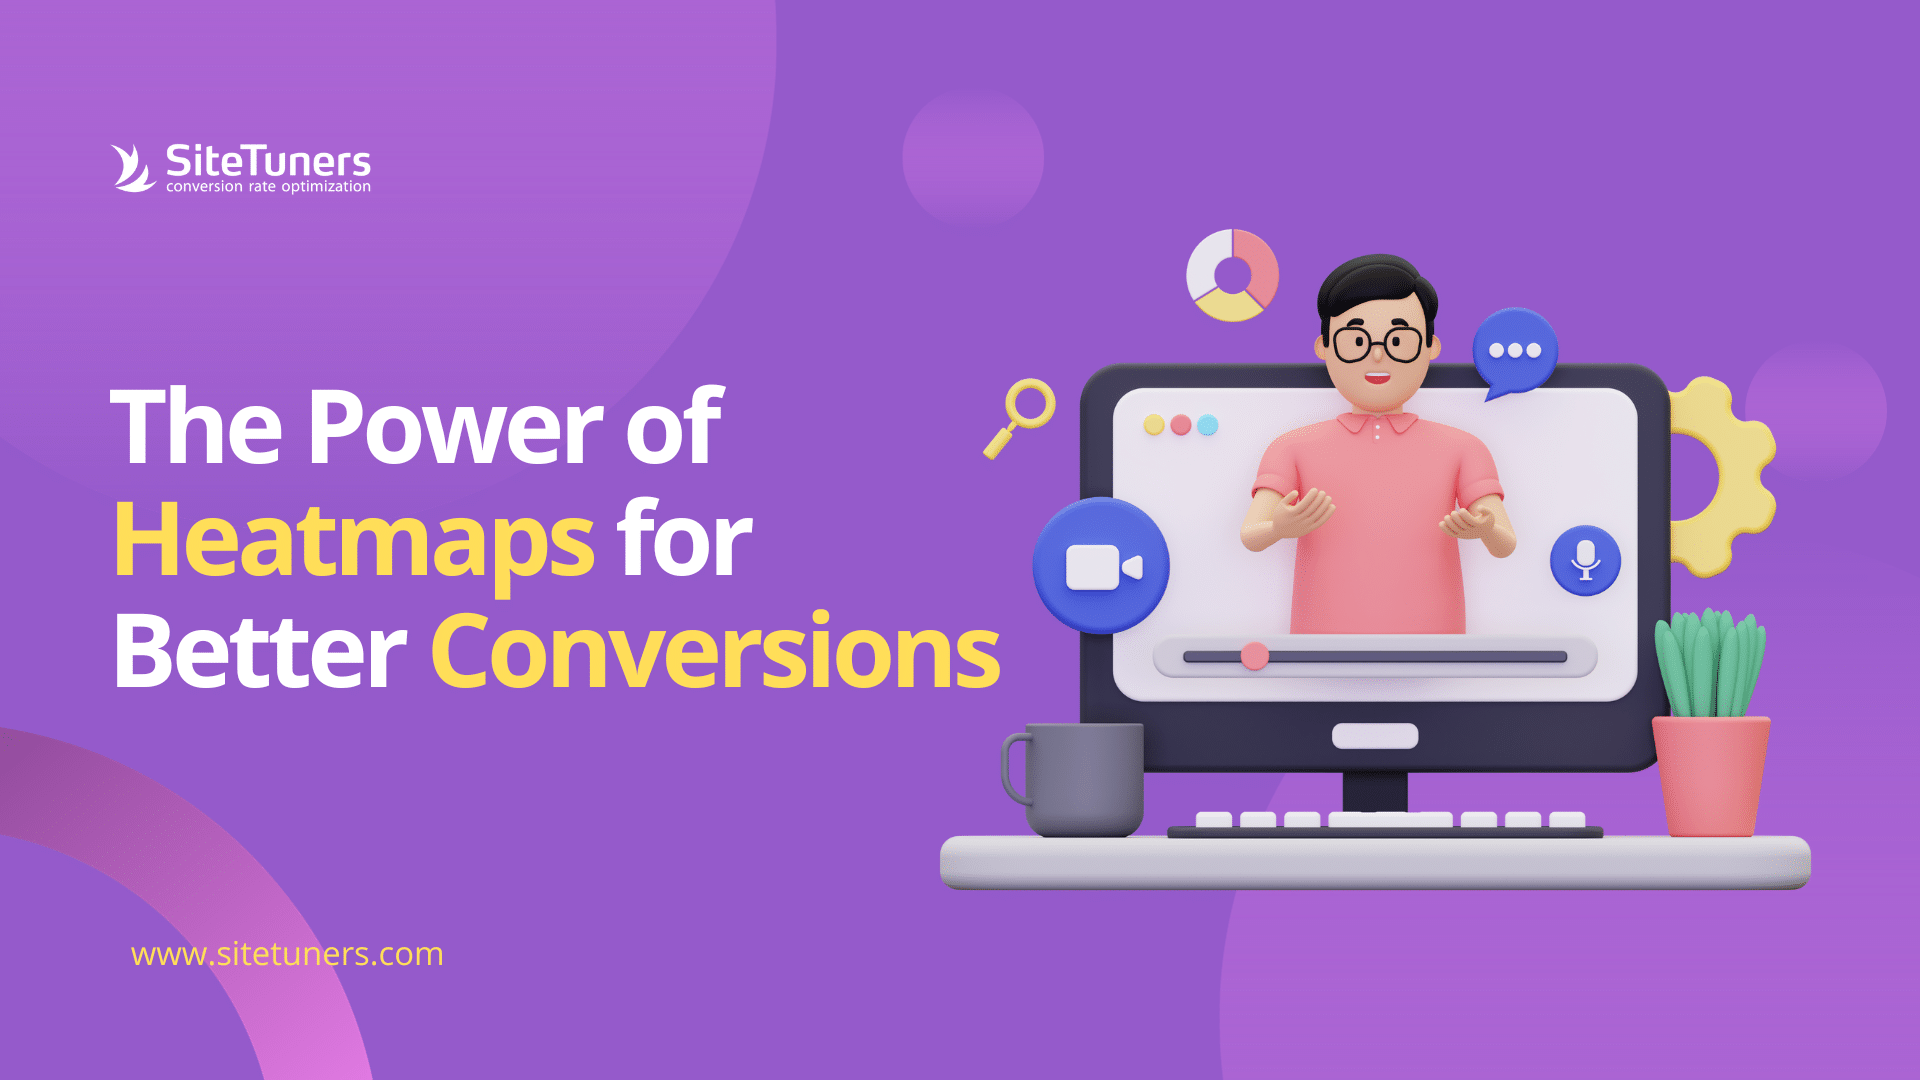 The Power of Heatmaps for Better Conversions